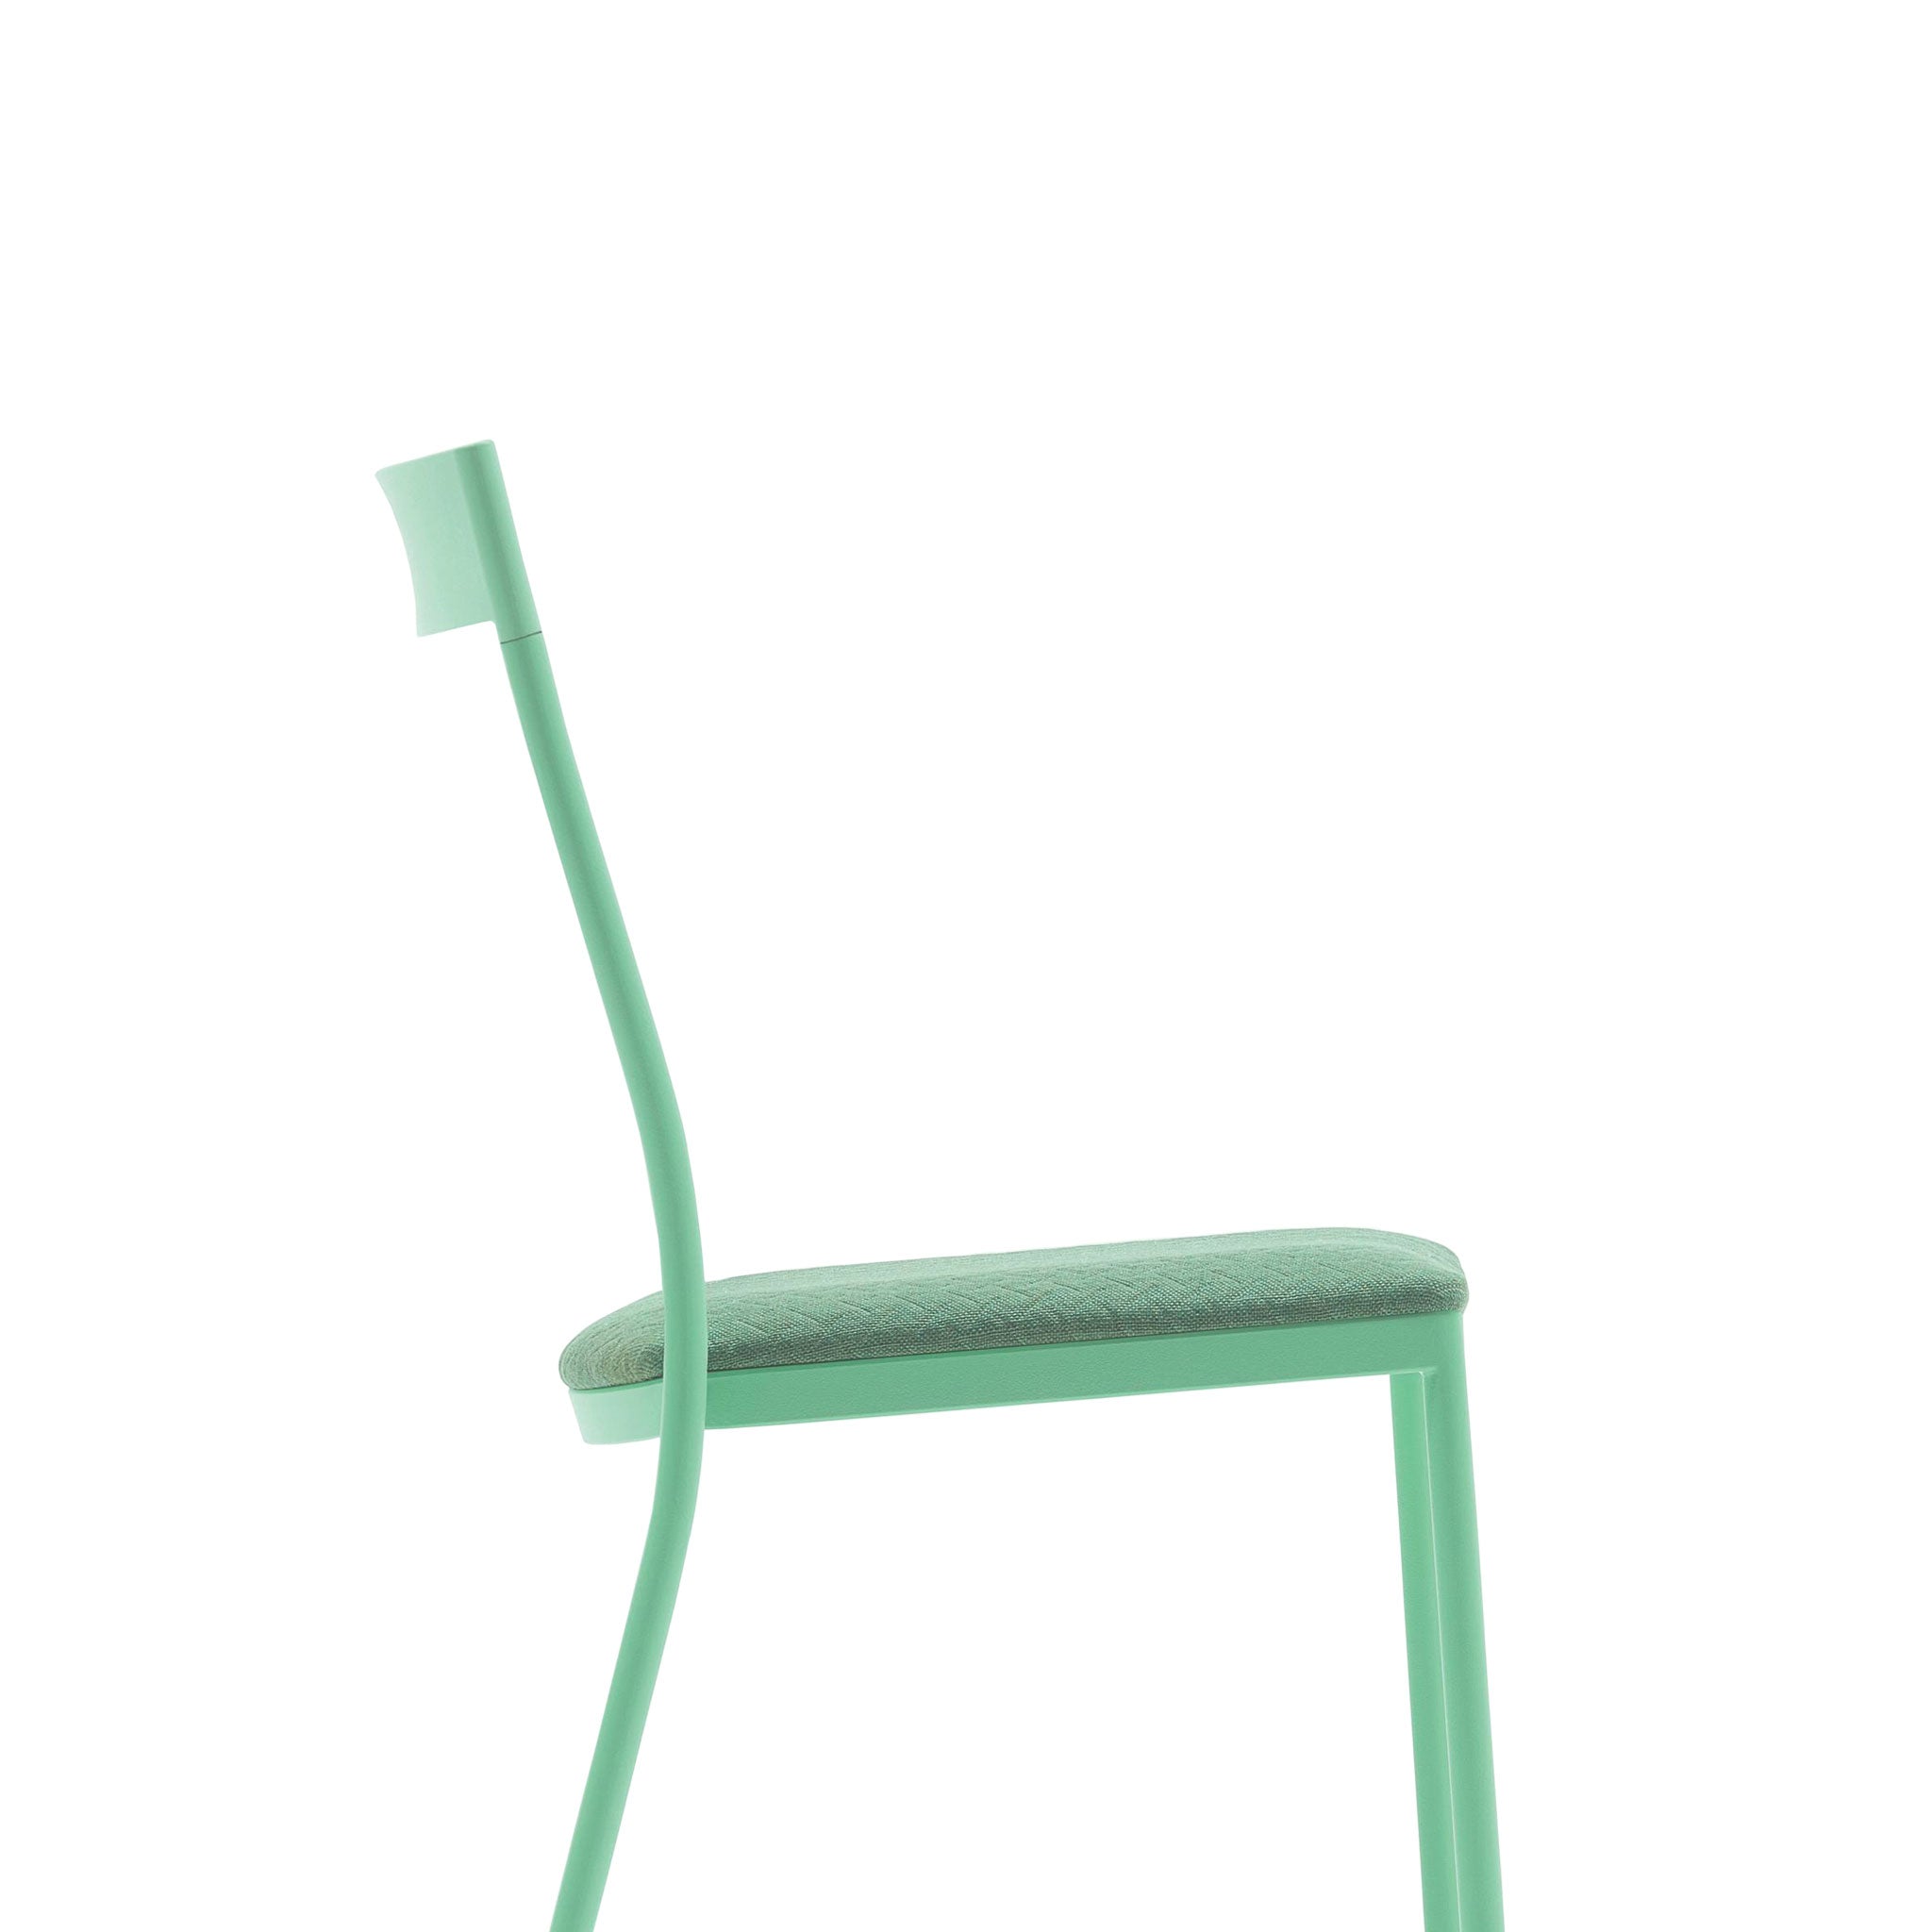 Twigz Café Chair - Seat Upholstered